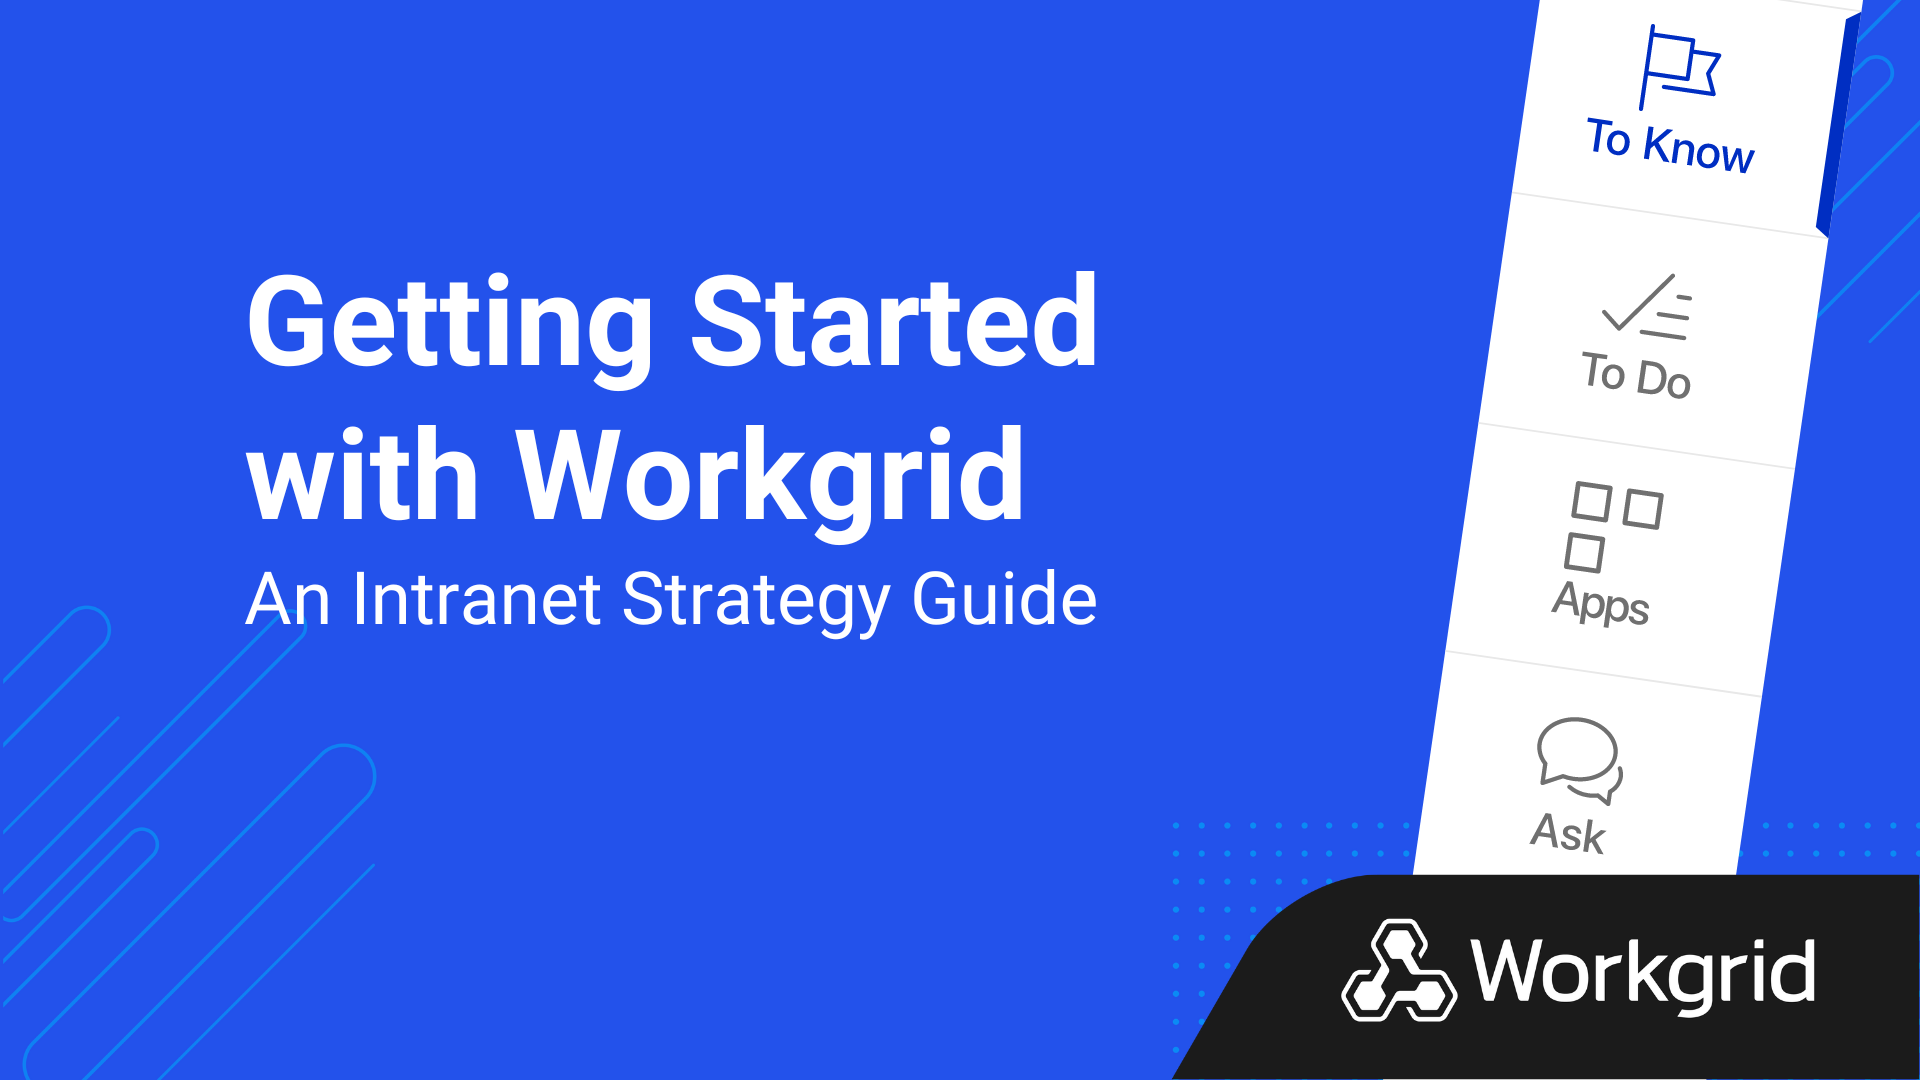 Getting Started with Workgrid Guide